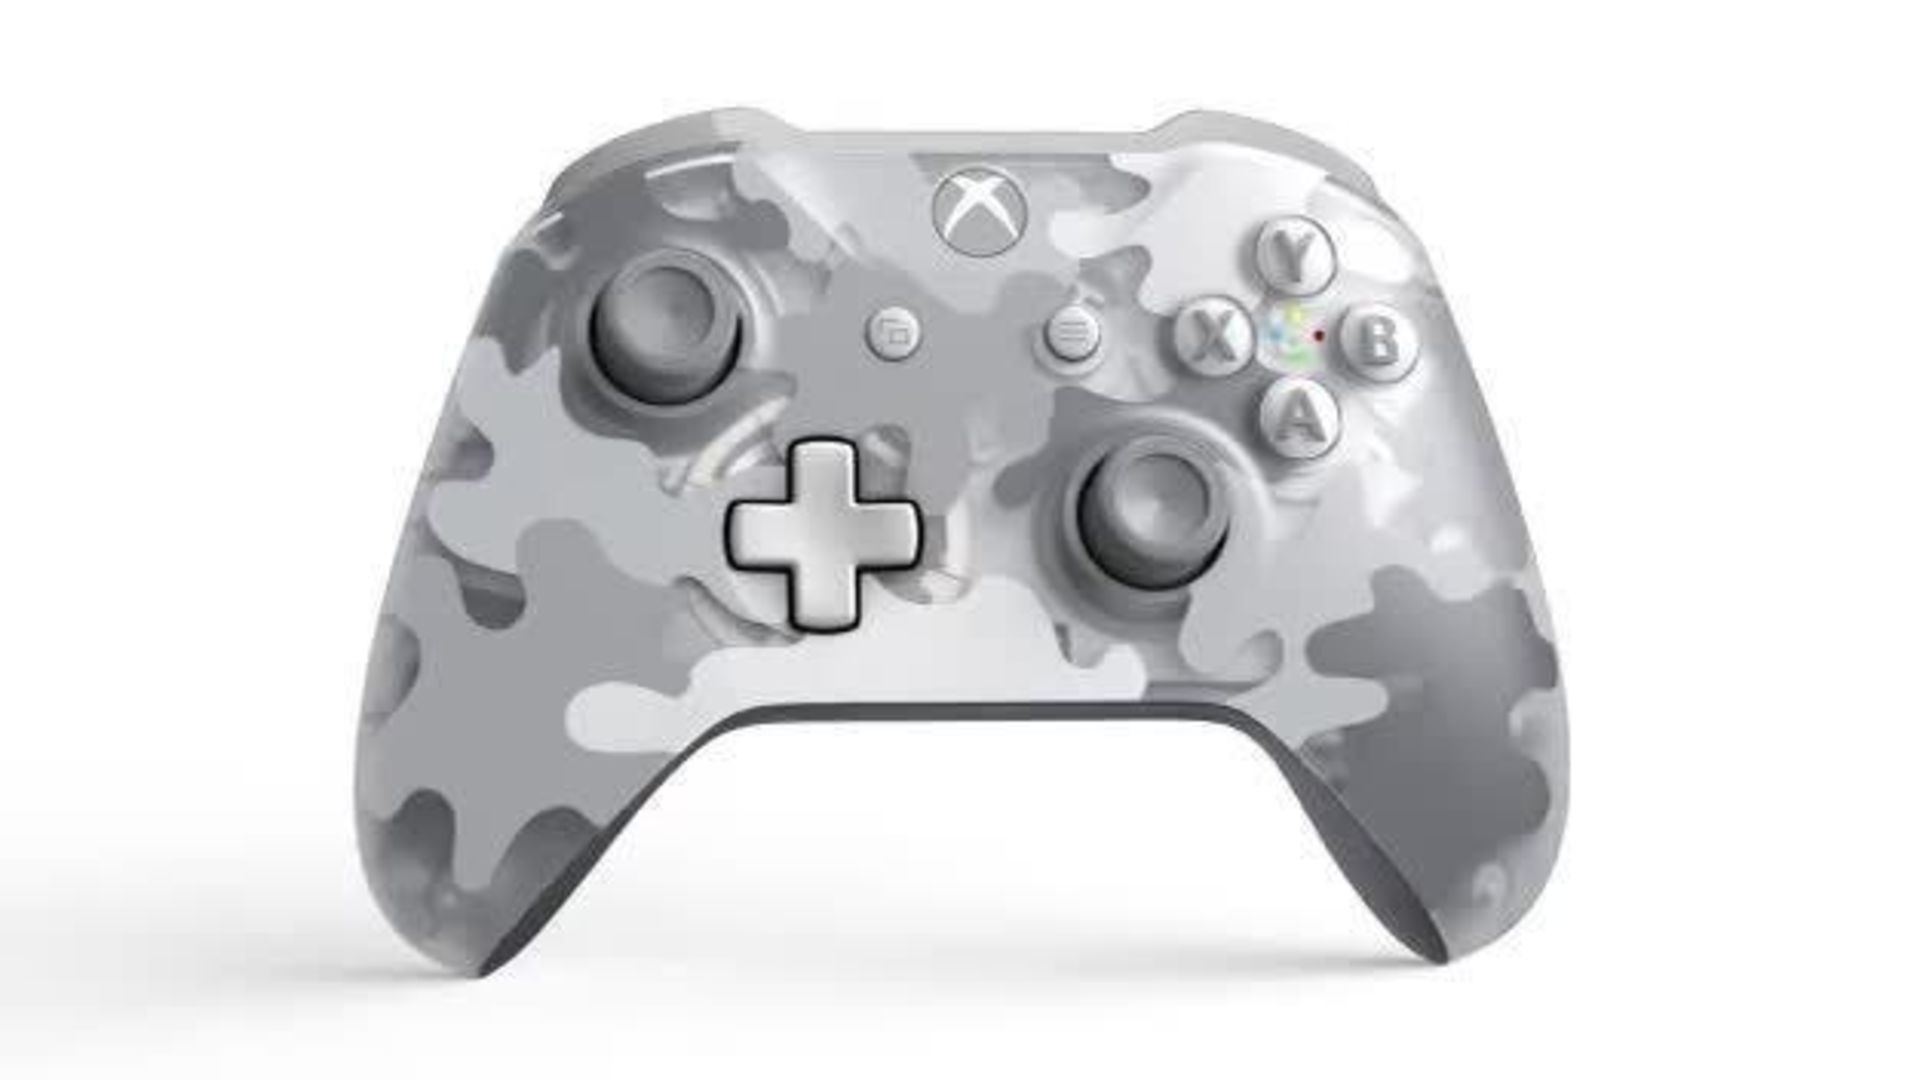 Official Xbox One Wireless Controller - Arctic Camo 735/2012 £64.99 RRP